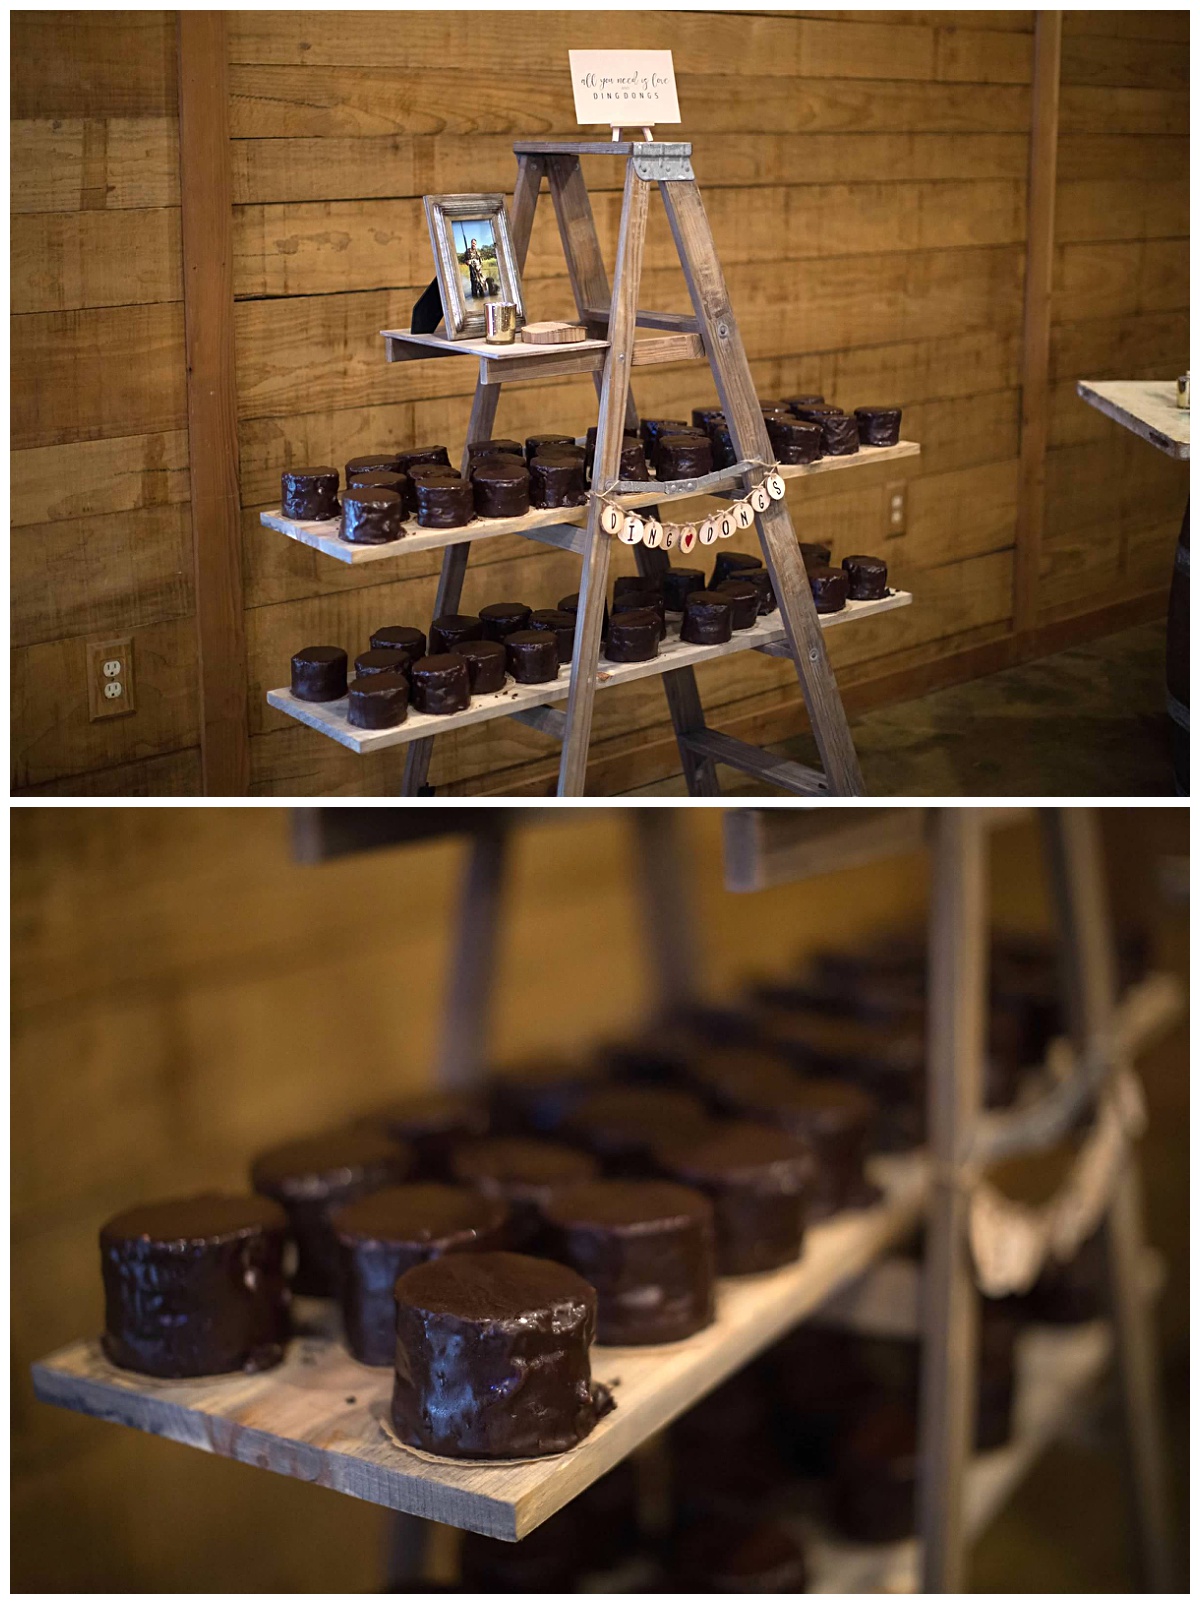 Ding Dongs by The Bake Shoppe on a display Ladder at Houston Winery Wedding Venue for a Winter Wedding